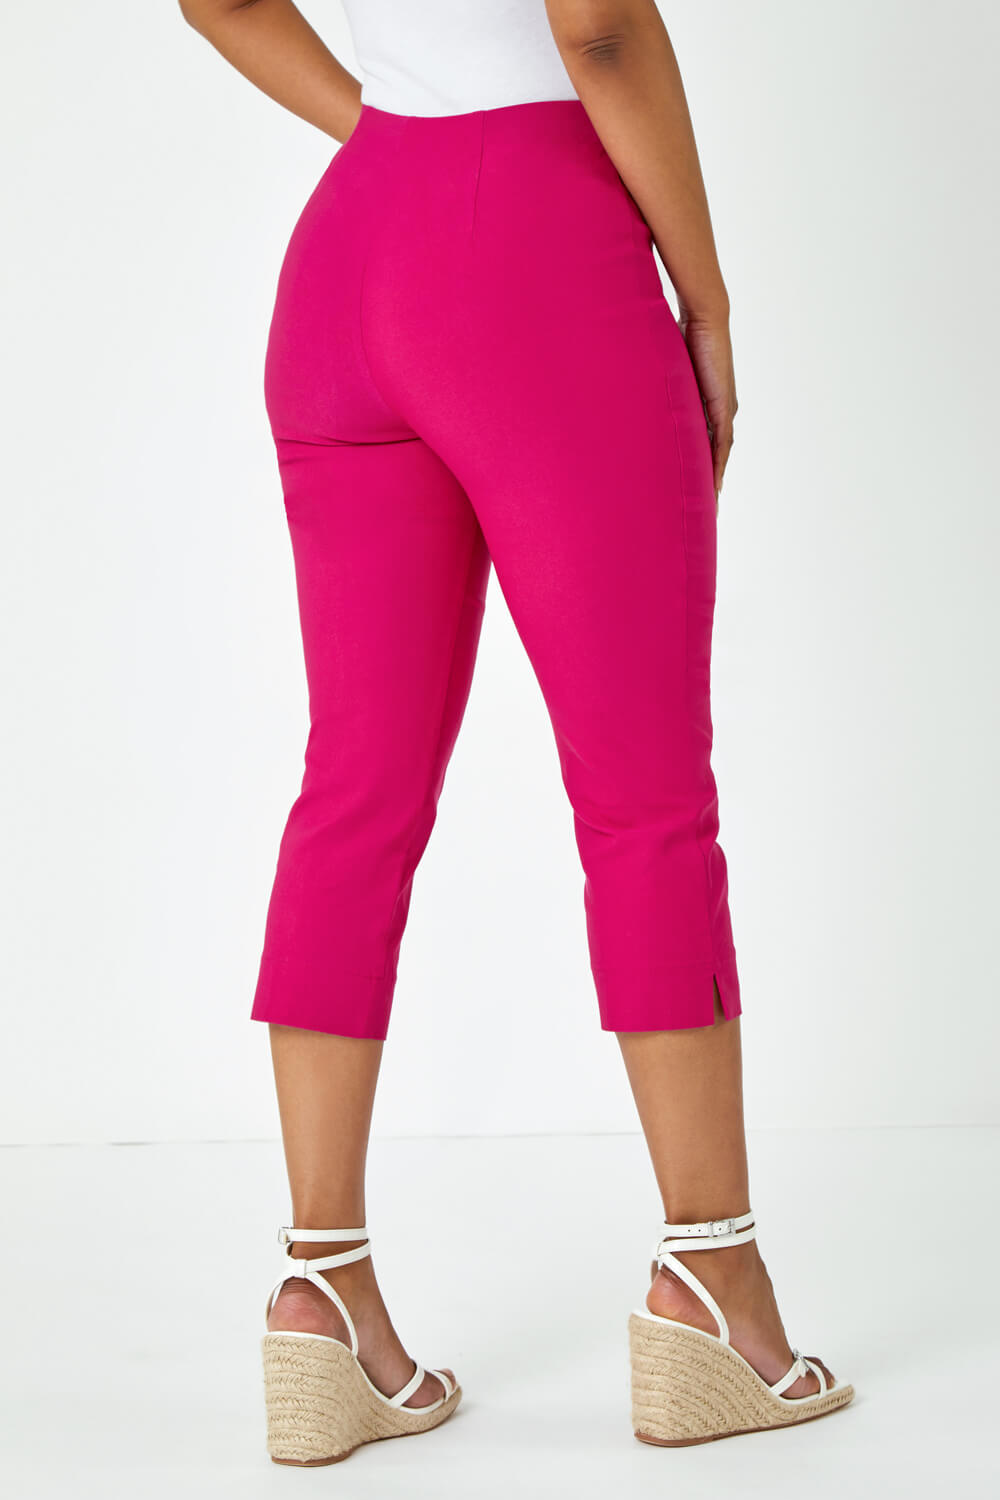 CERISE Petite Cropped Stretch Trouser, Image 3 of 5